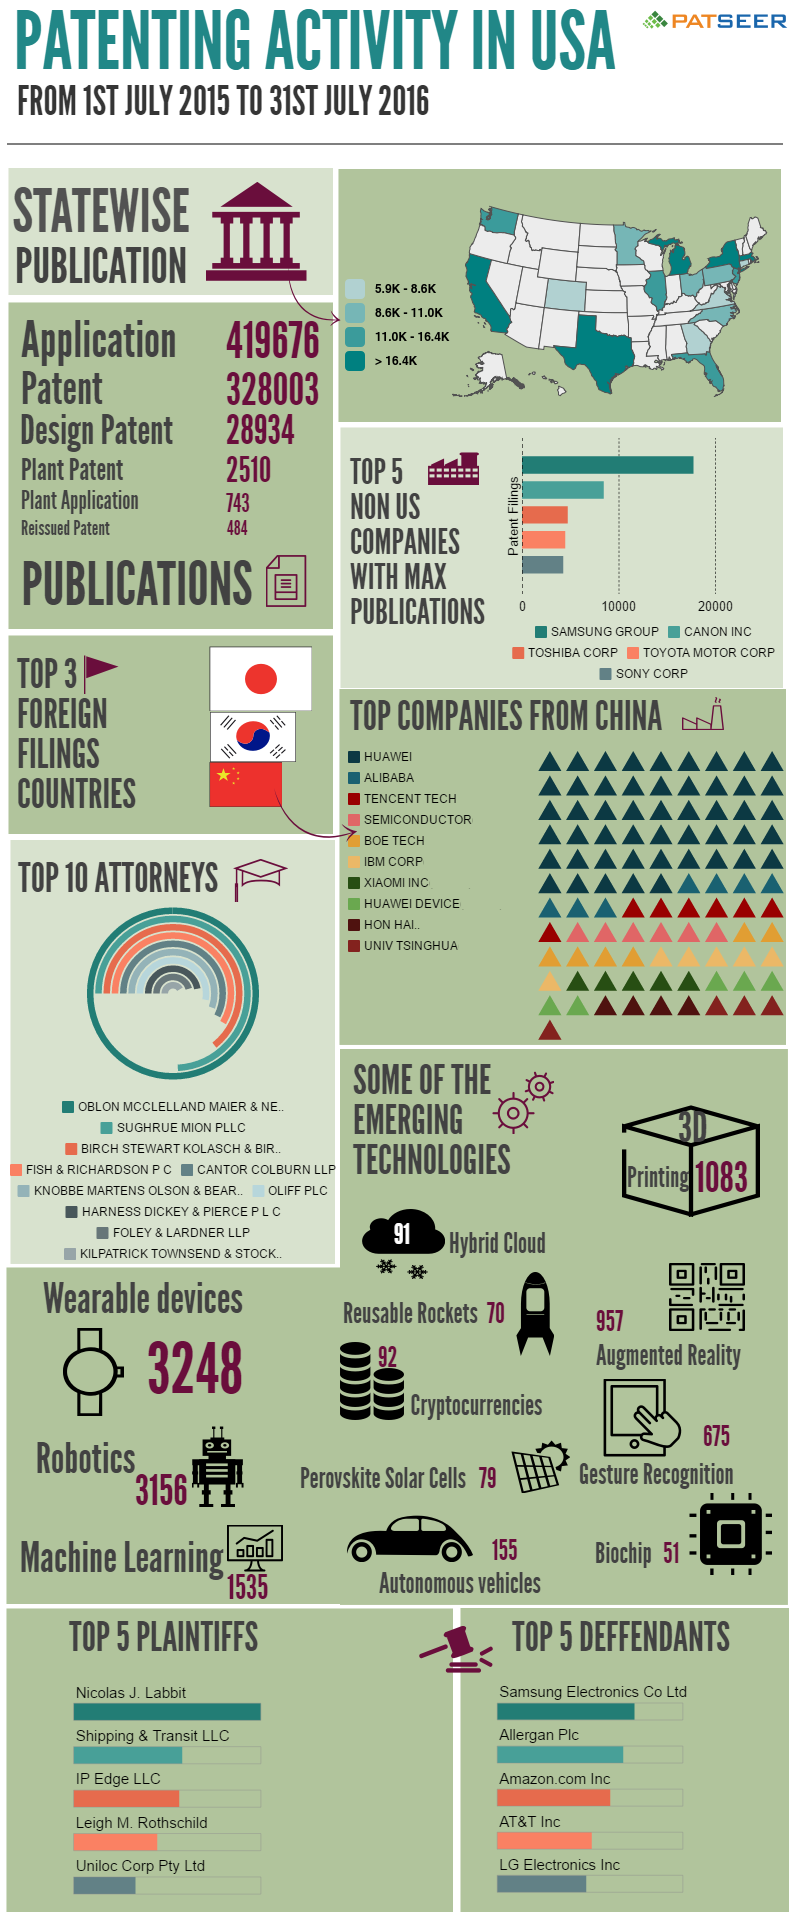 Patenting_Activity_in_USA_2015_2016_PatSeer_Infographics